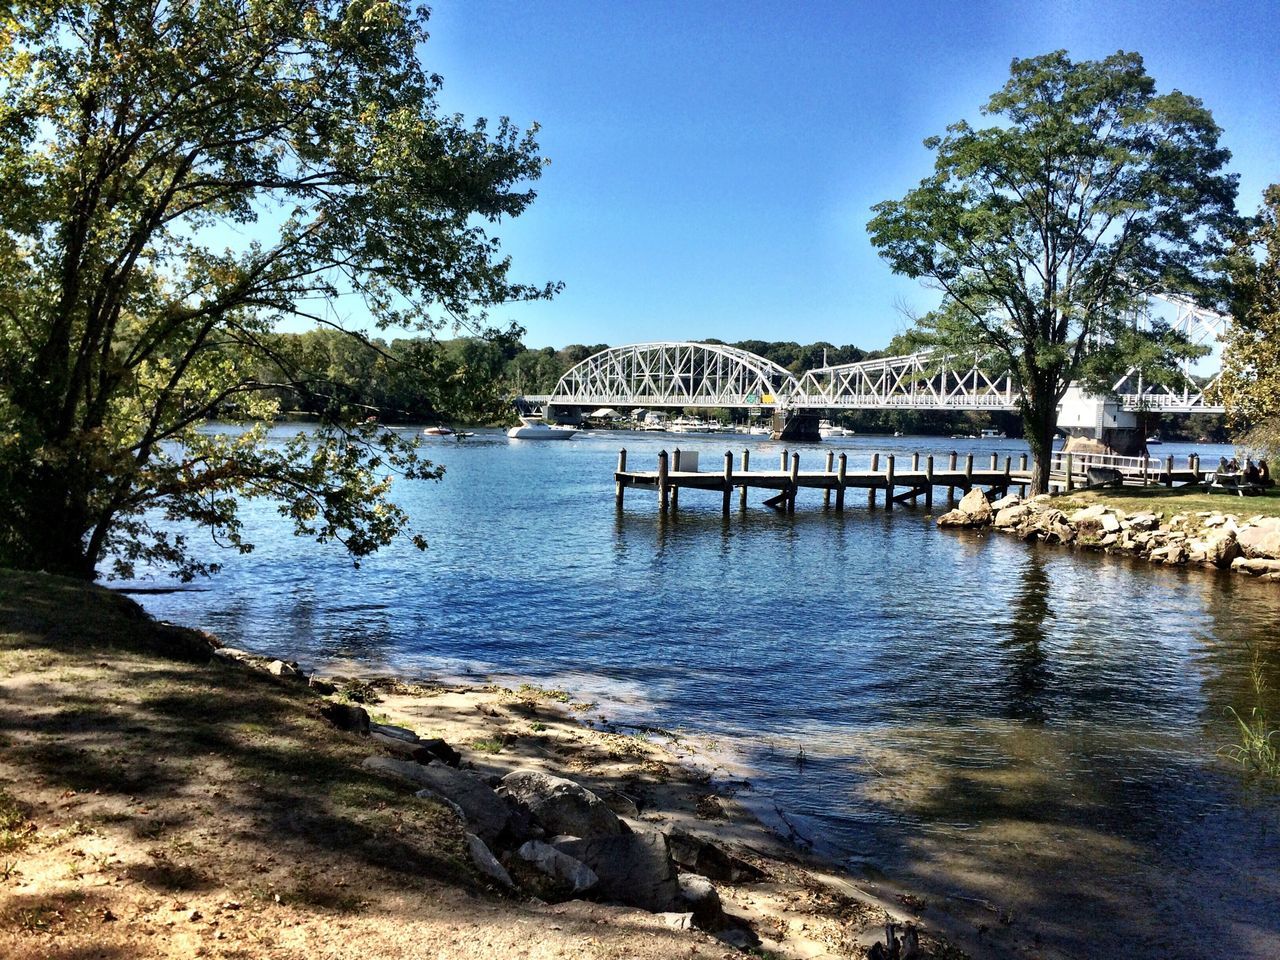 water, tree, built structure, architecture, blue, clear sky, tranquility, river, bridge - man made structure, tranquil scene, lake, nature, sky, scenics, day, building exterior, beauty in nature, sunlight, connection, pier